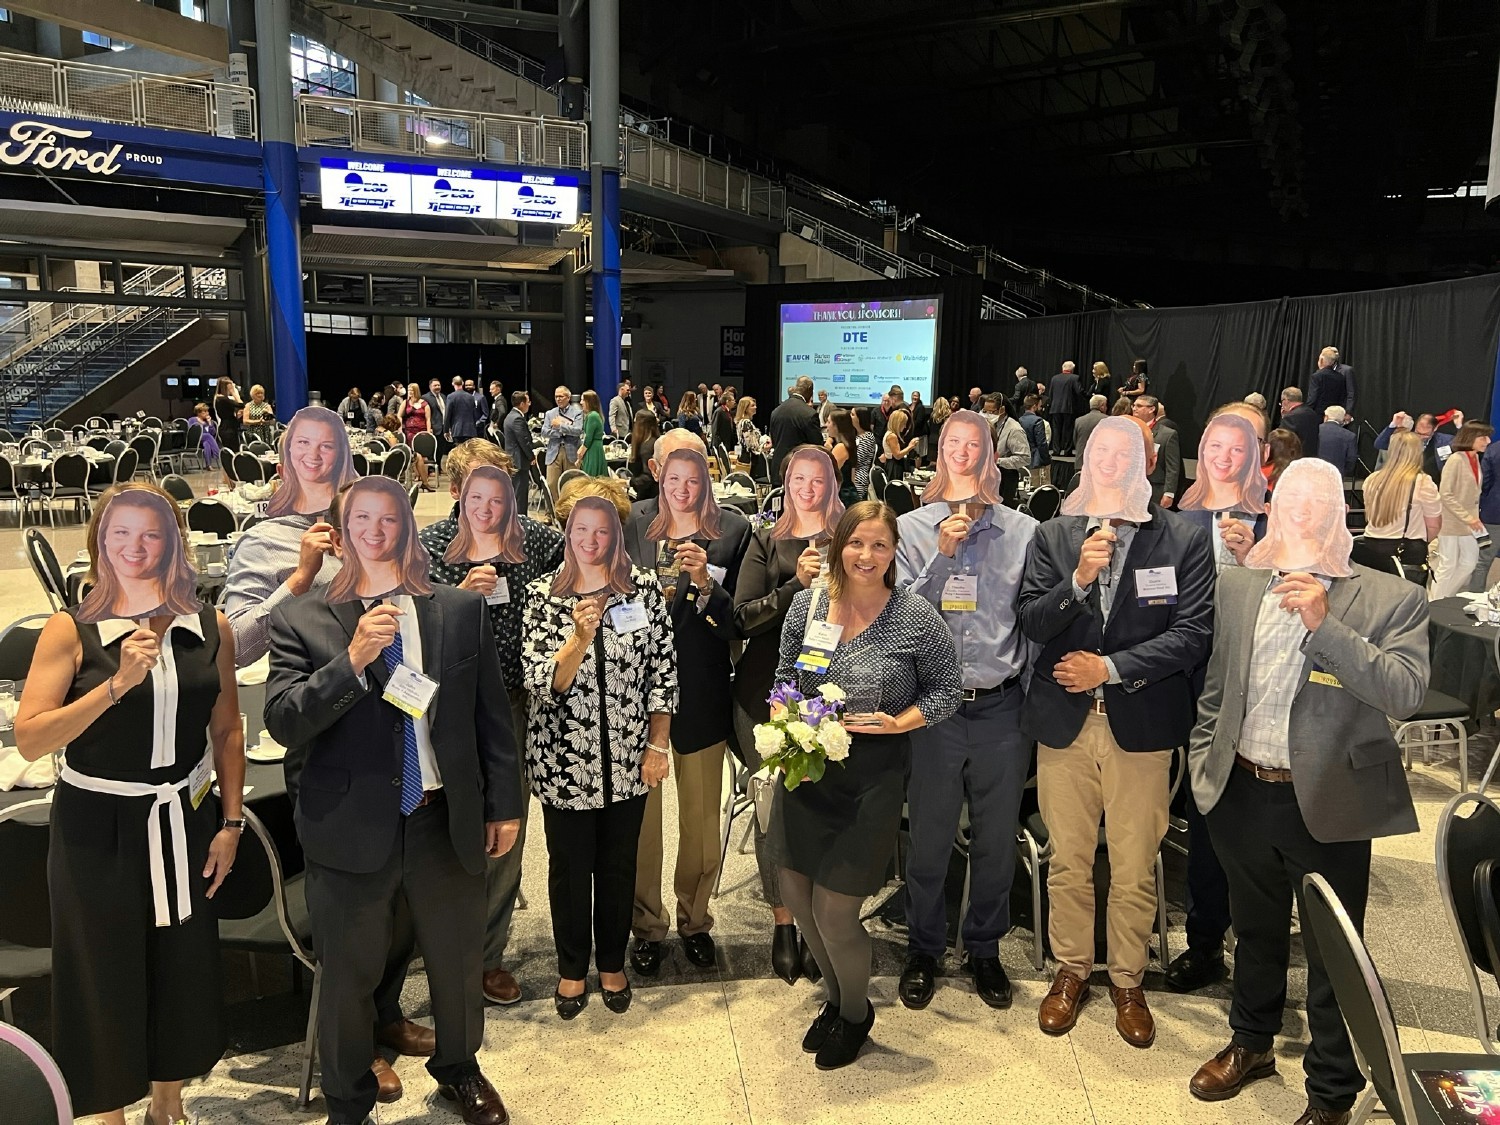 Team Ruby supports Katrin as she receives the Engineering Society of Detroit Young Engineer Honor, Ford Field, Detroit.